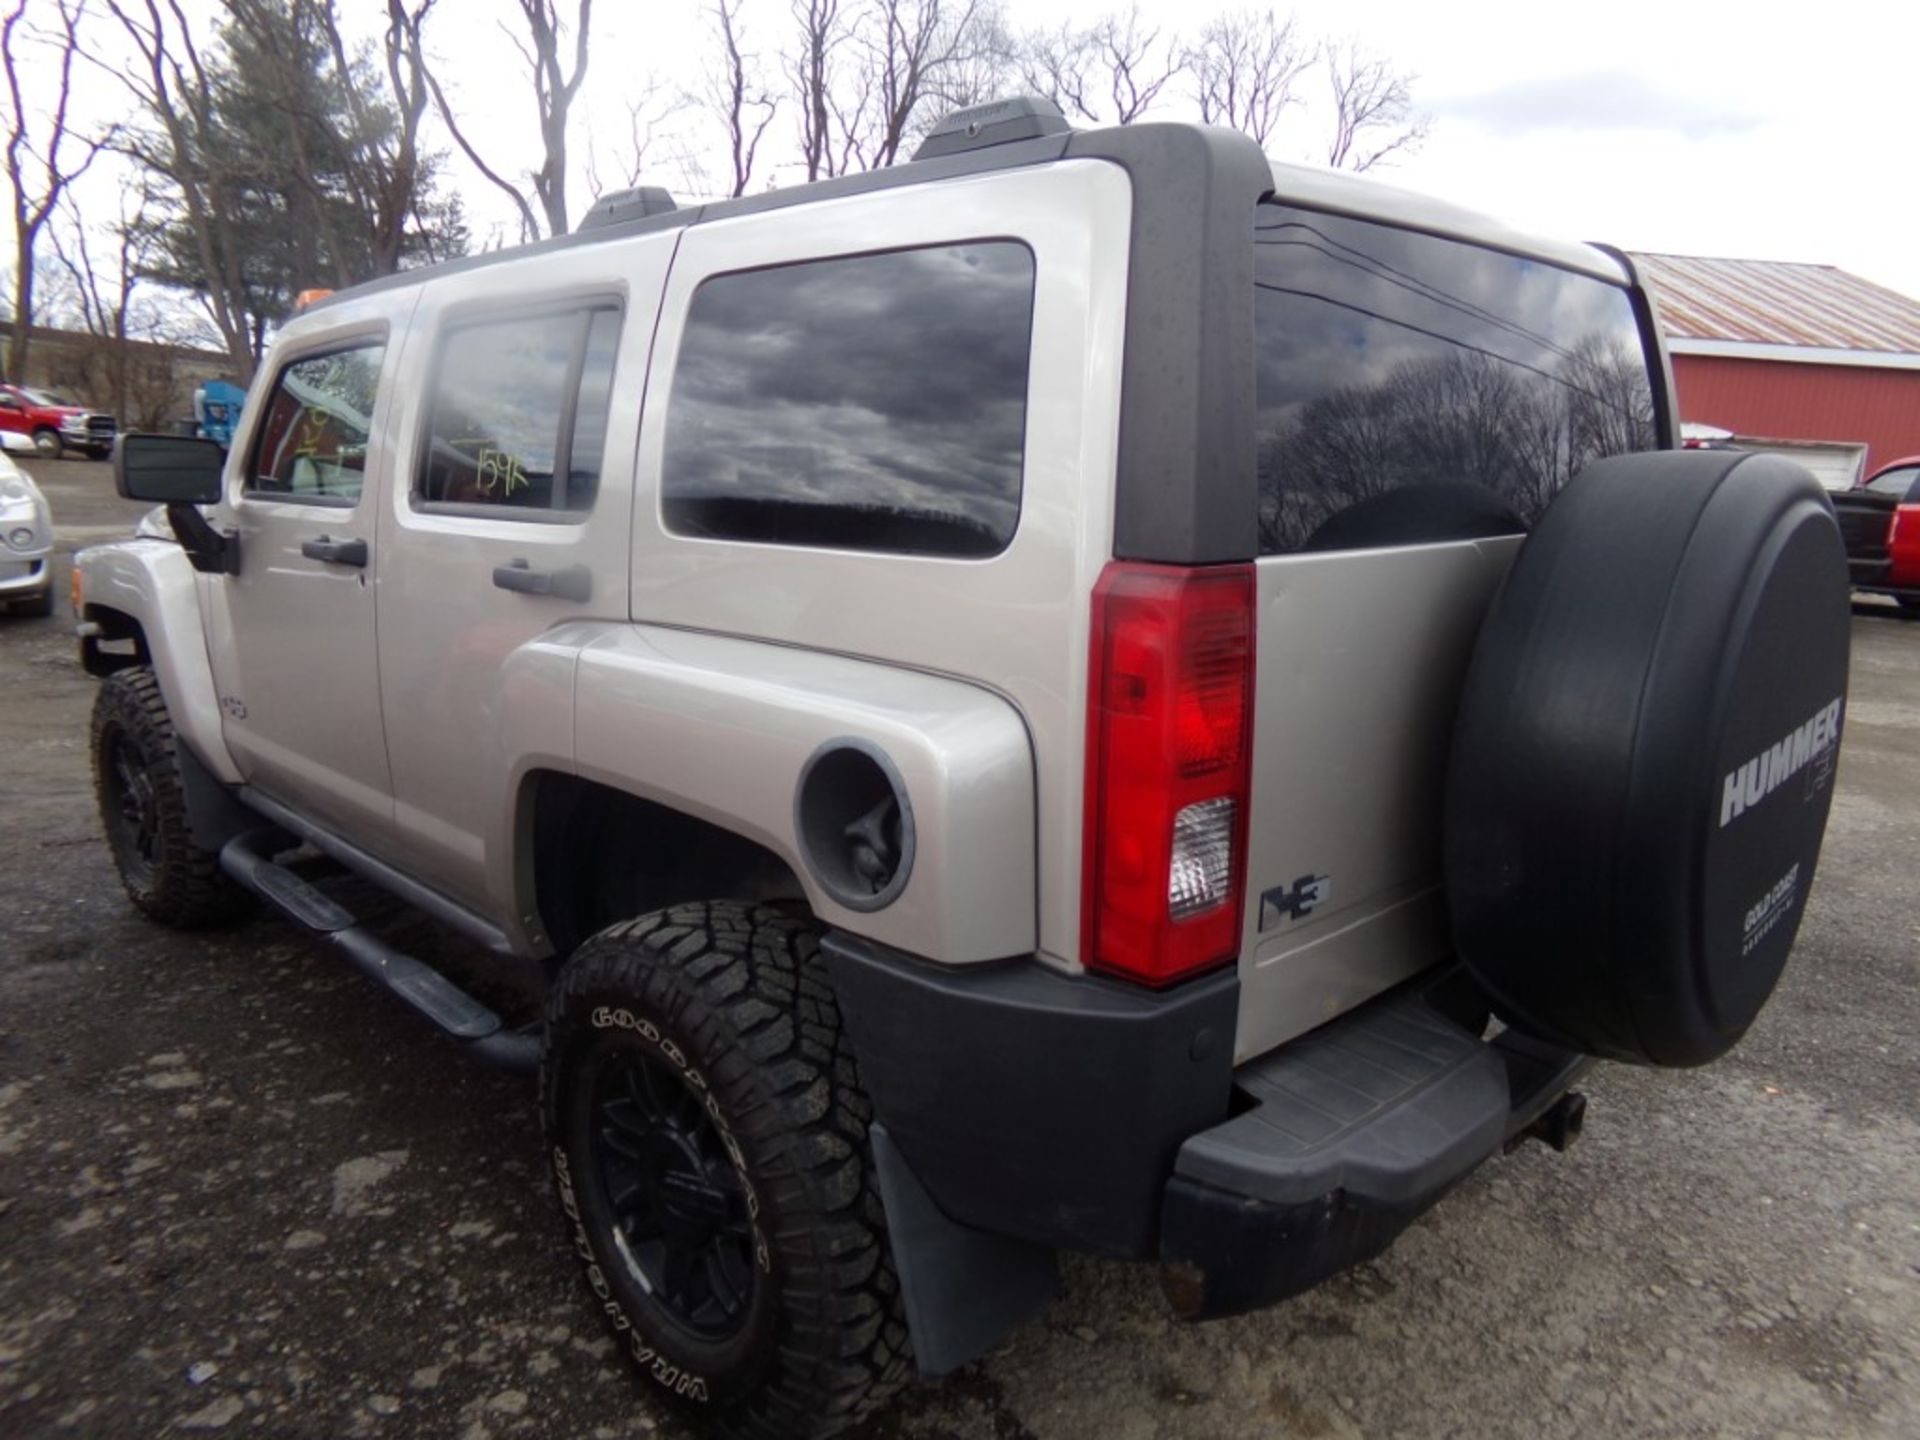 2006 Hummer H3, Sunroof,Gray, 159,522 Miles, VIN#: 5GTDN136768171999 - Remote Auto Start,New - Image 2 of 11